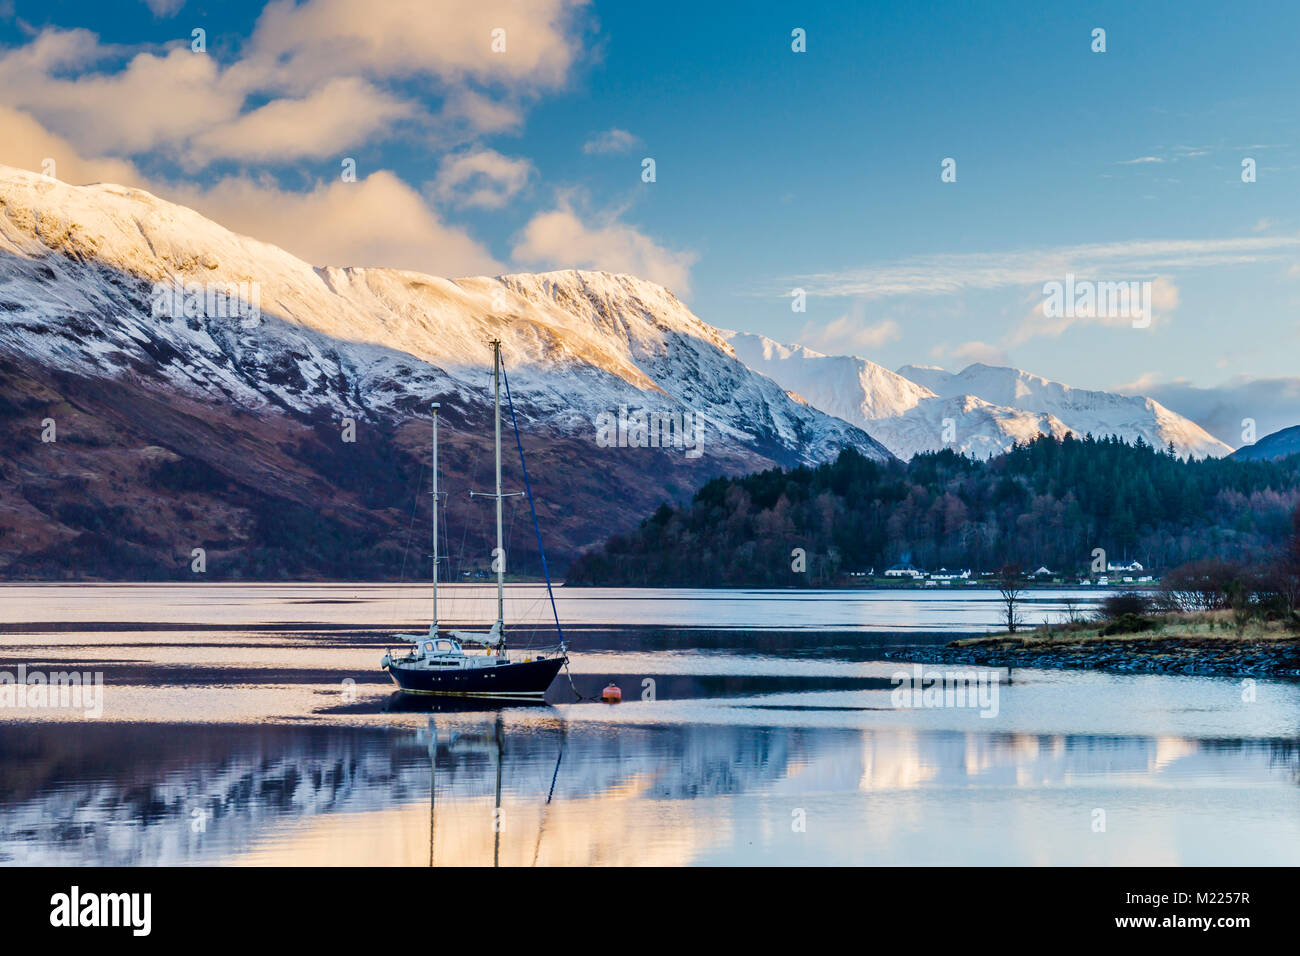 Taken from the hotel window, in Ballachulish, looking towards Glencoe Village and Mam na Gualainn. Stock Photo